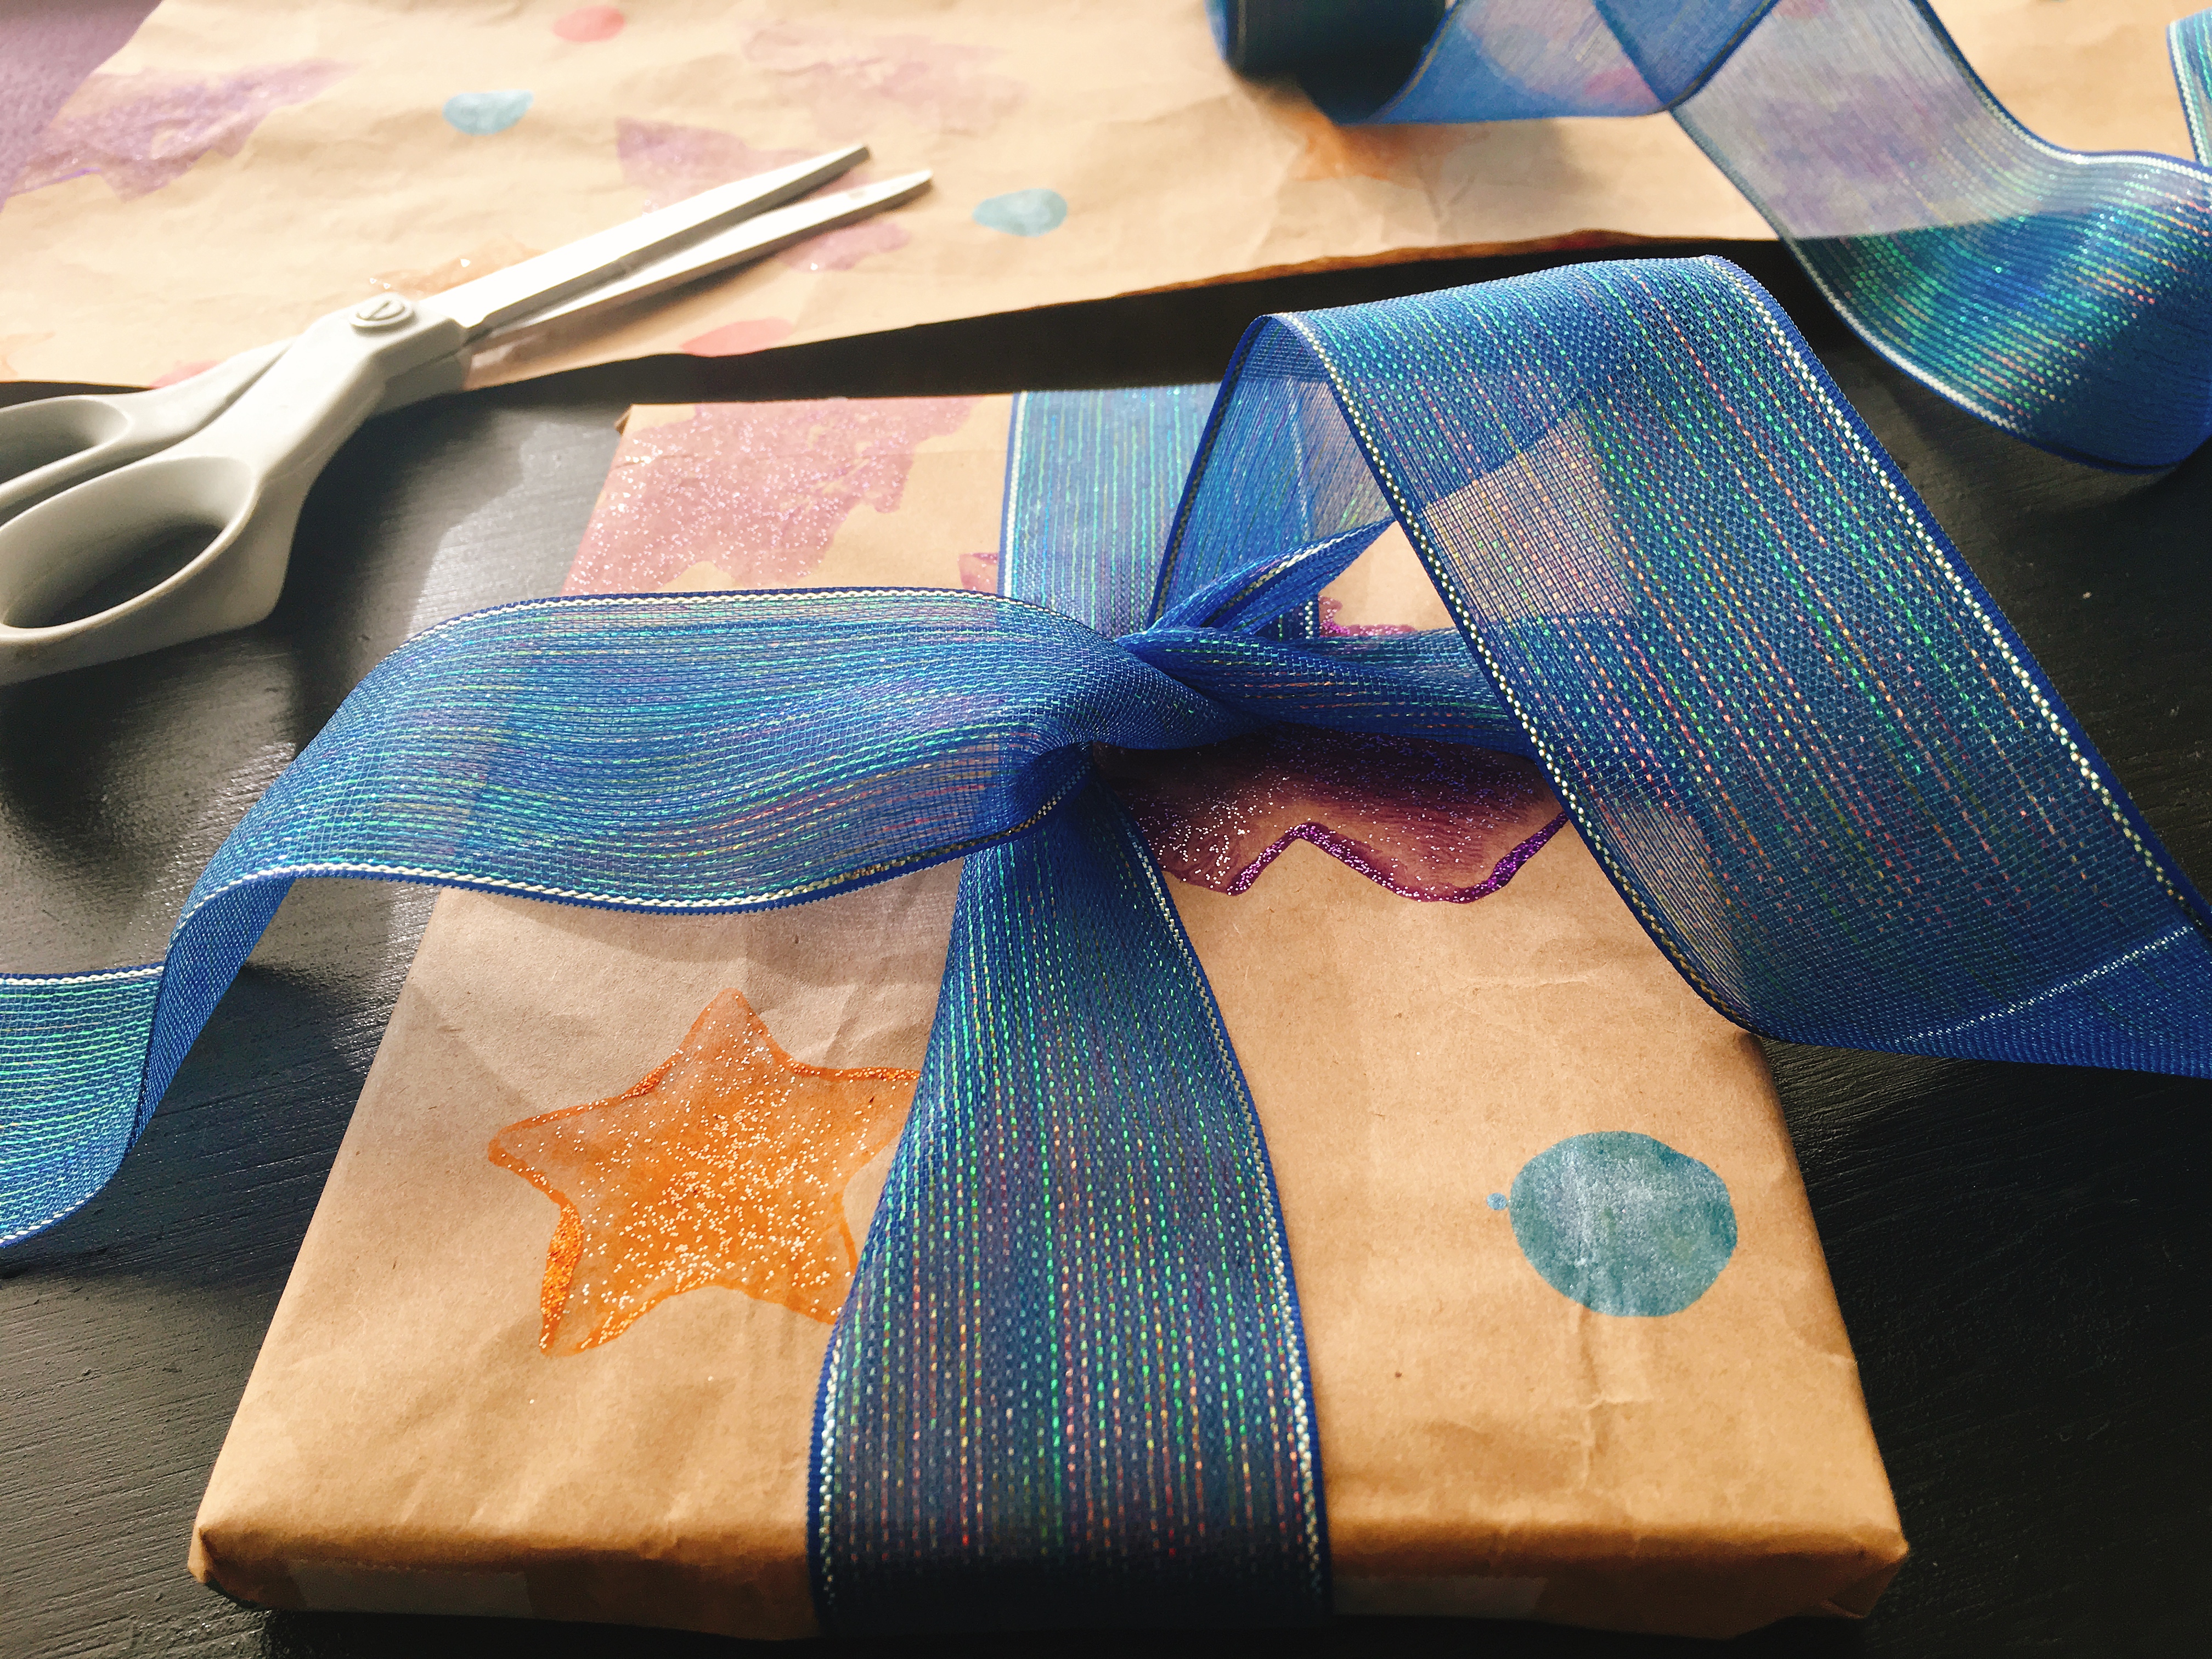 Make Phonebook Wrapping Paper - A Recycled Holiday Craft for Kids